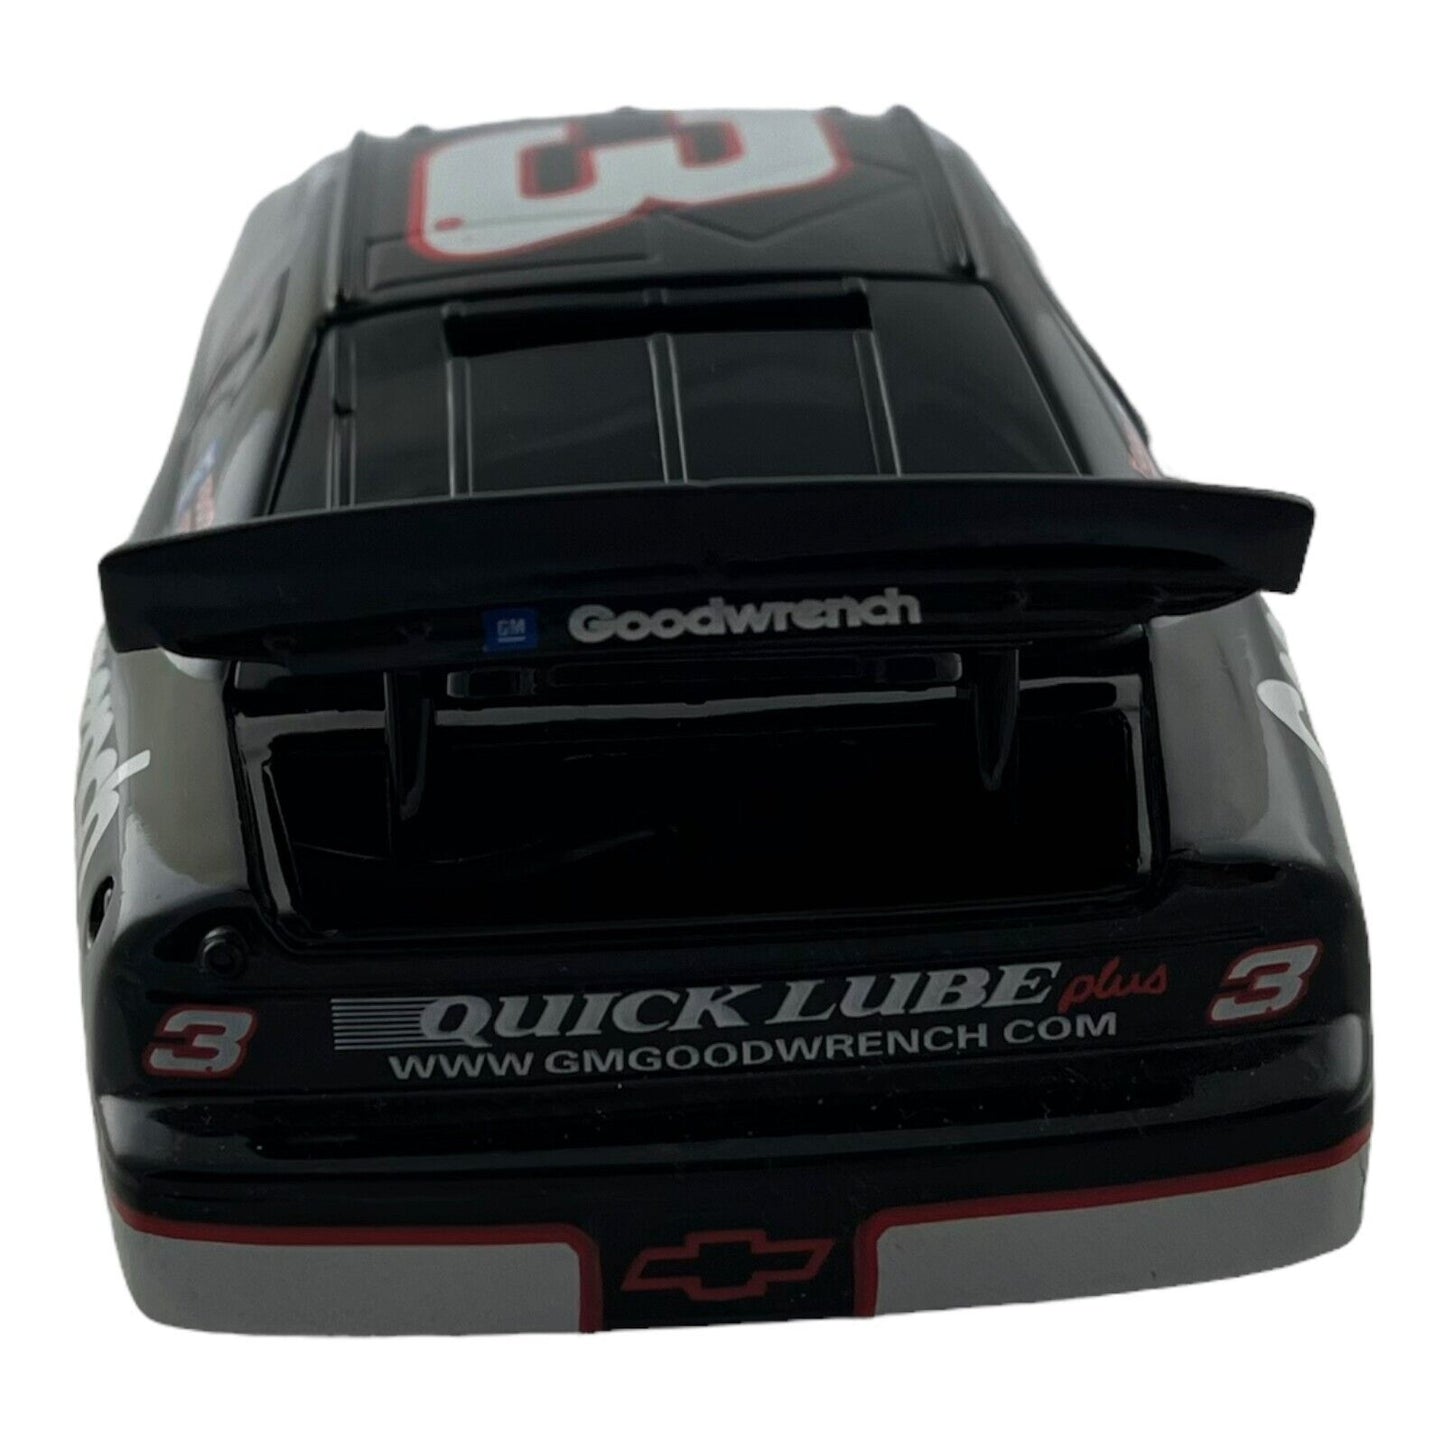 1:24 Scale Dale Earnhardt Sr. #3 Goodwrench Plus Bank 1998 Action